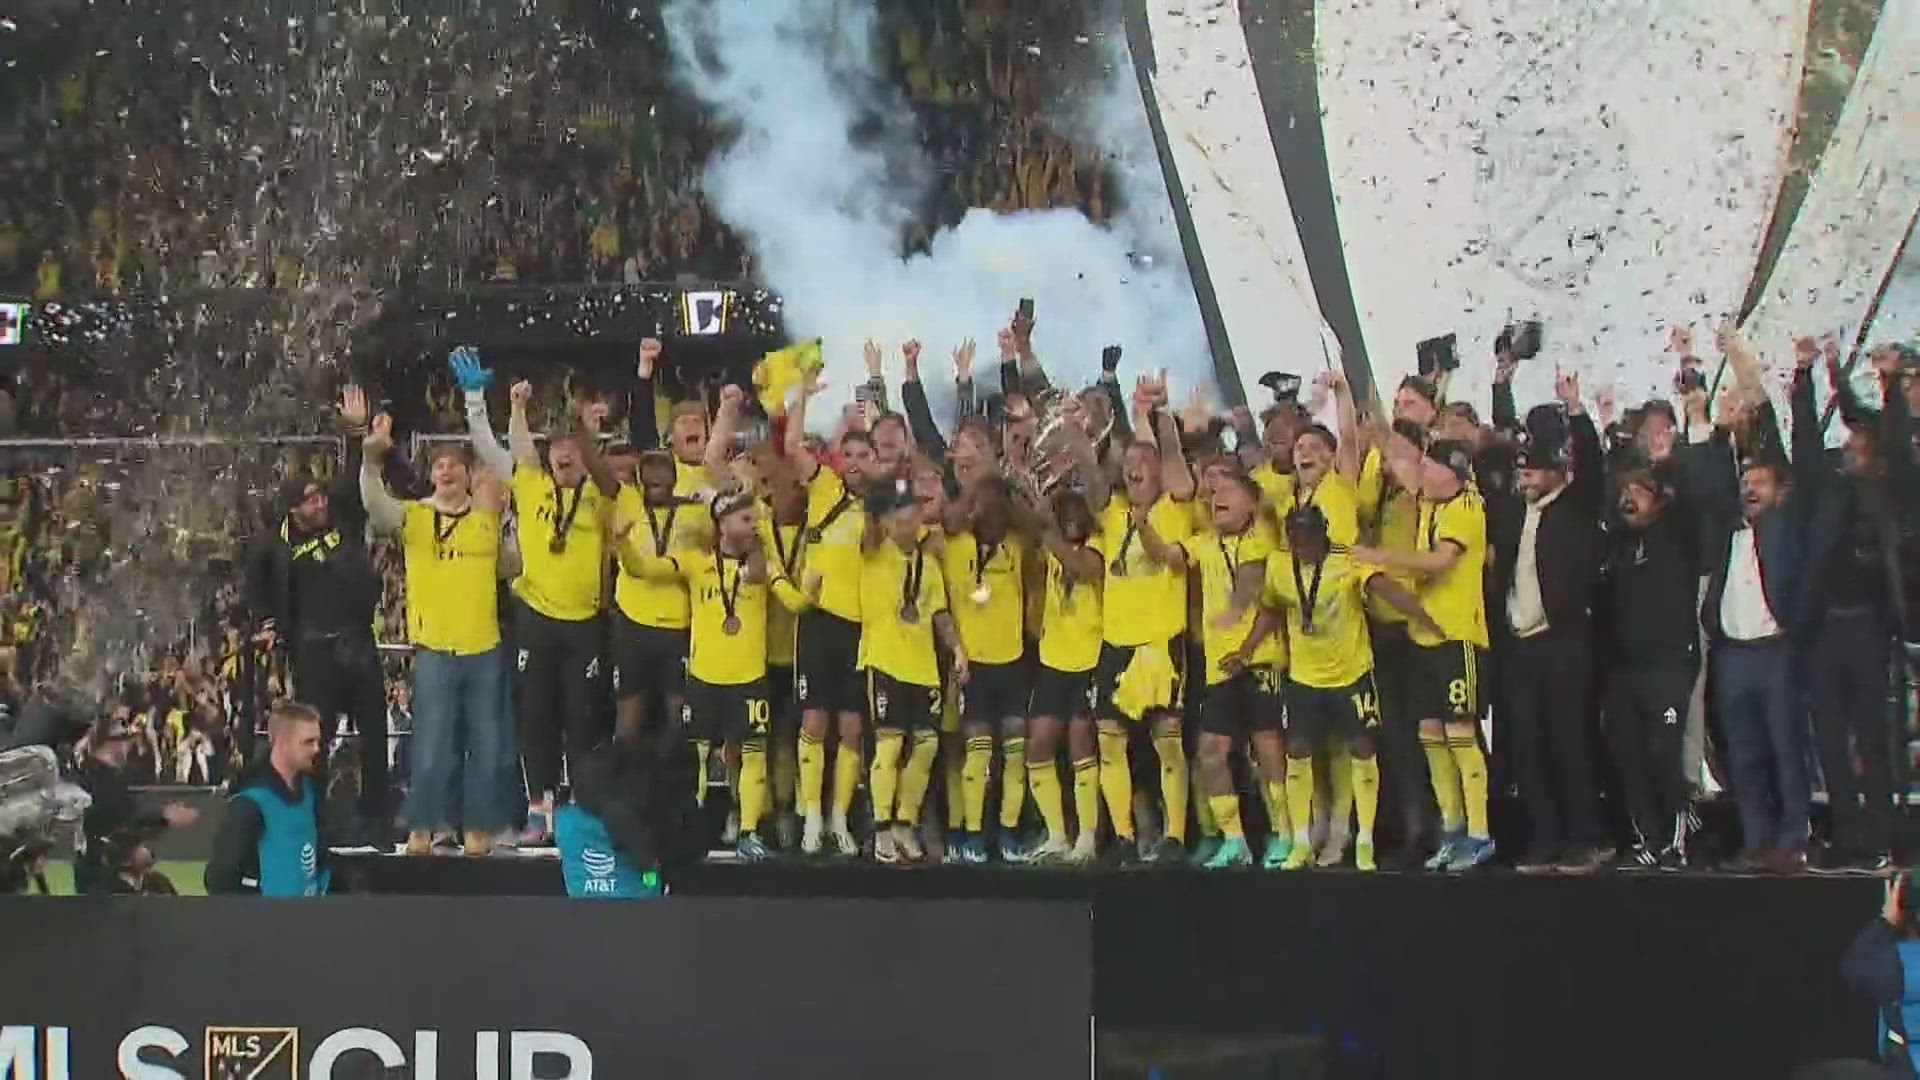 The win marks the third title in club history.